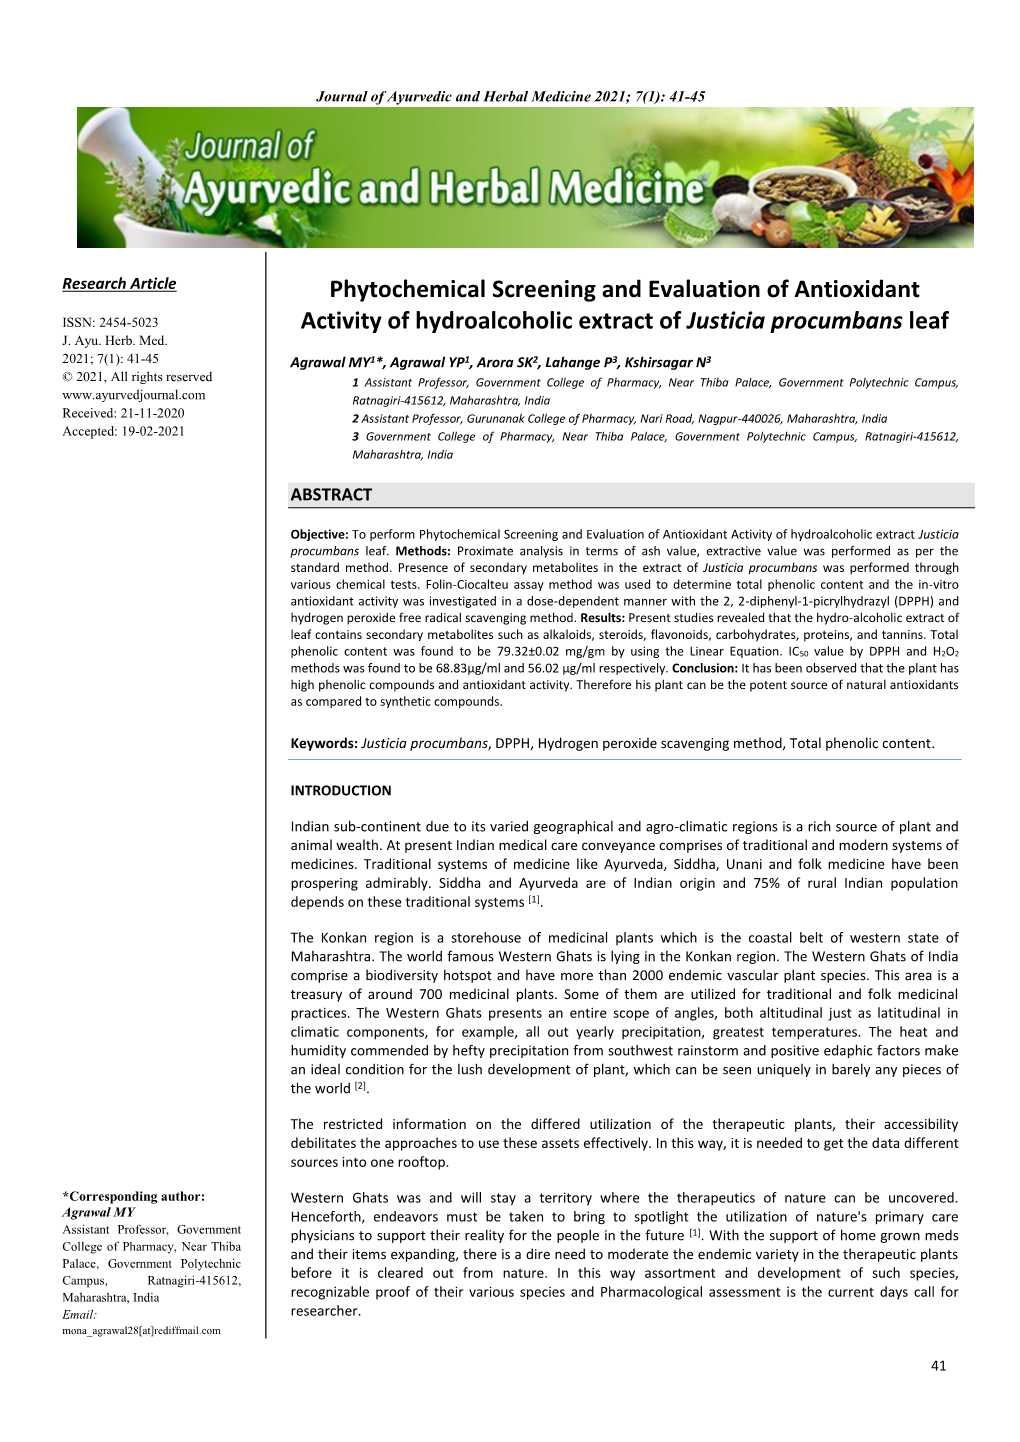 Phytochemical Screening and Evaluation of Antioxidant Activity of Hydroalcoholic Extract Justicia Procumbans Leaf